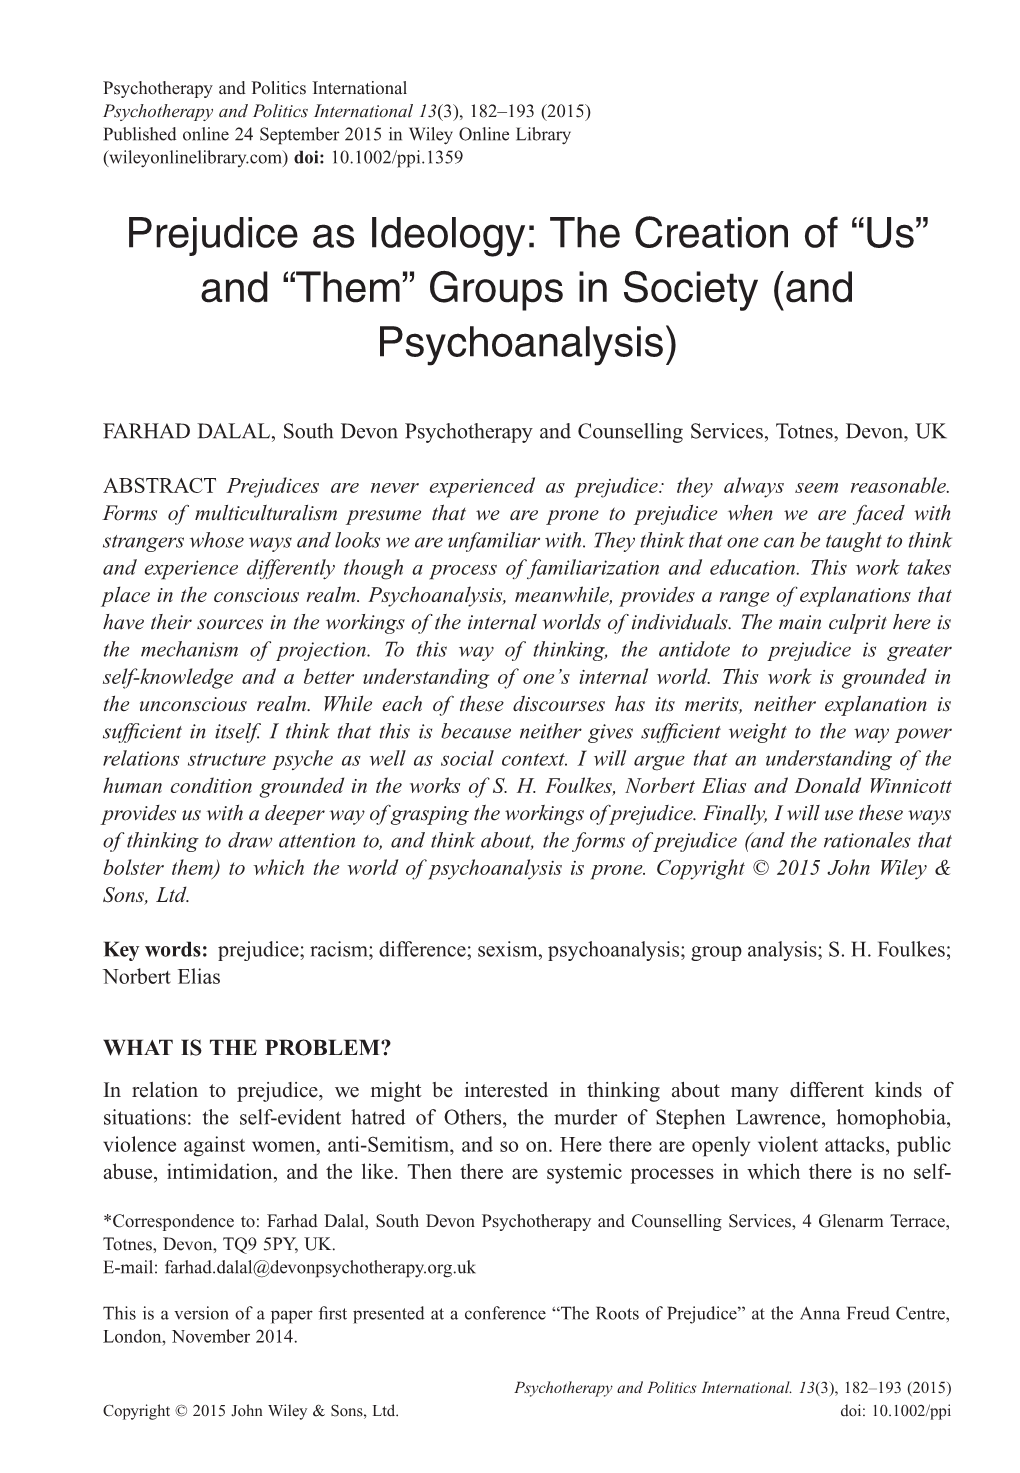 Prejudice As Ideology: the Creation of Us and Them Groups in Society